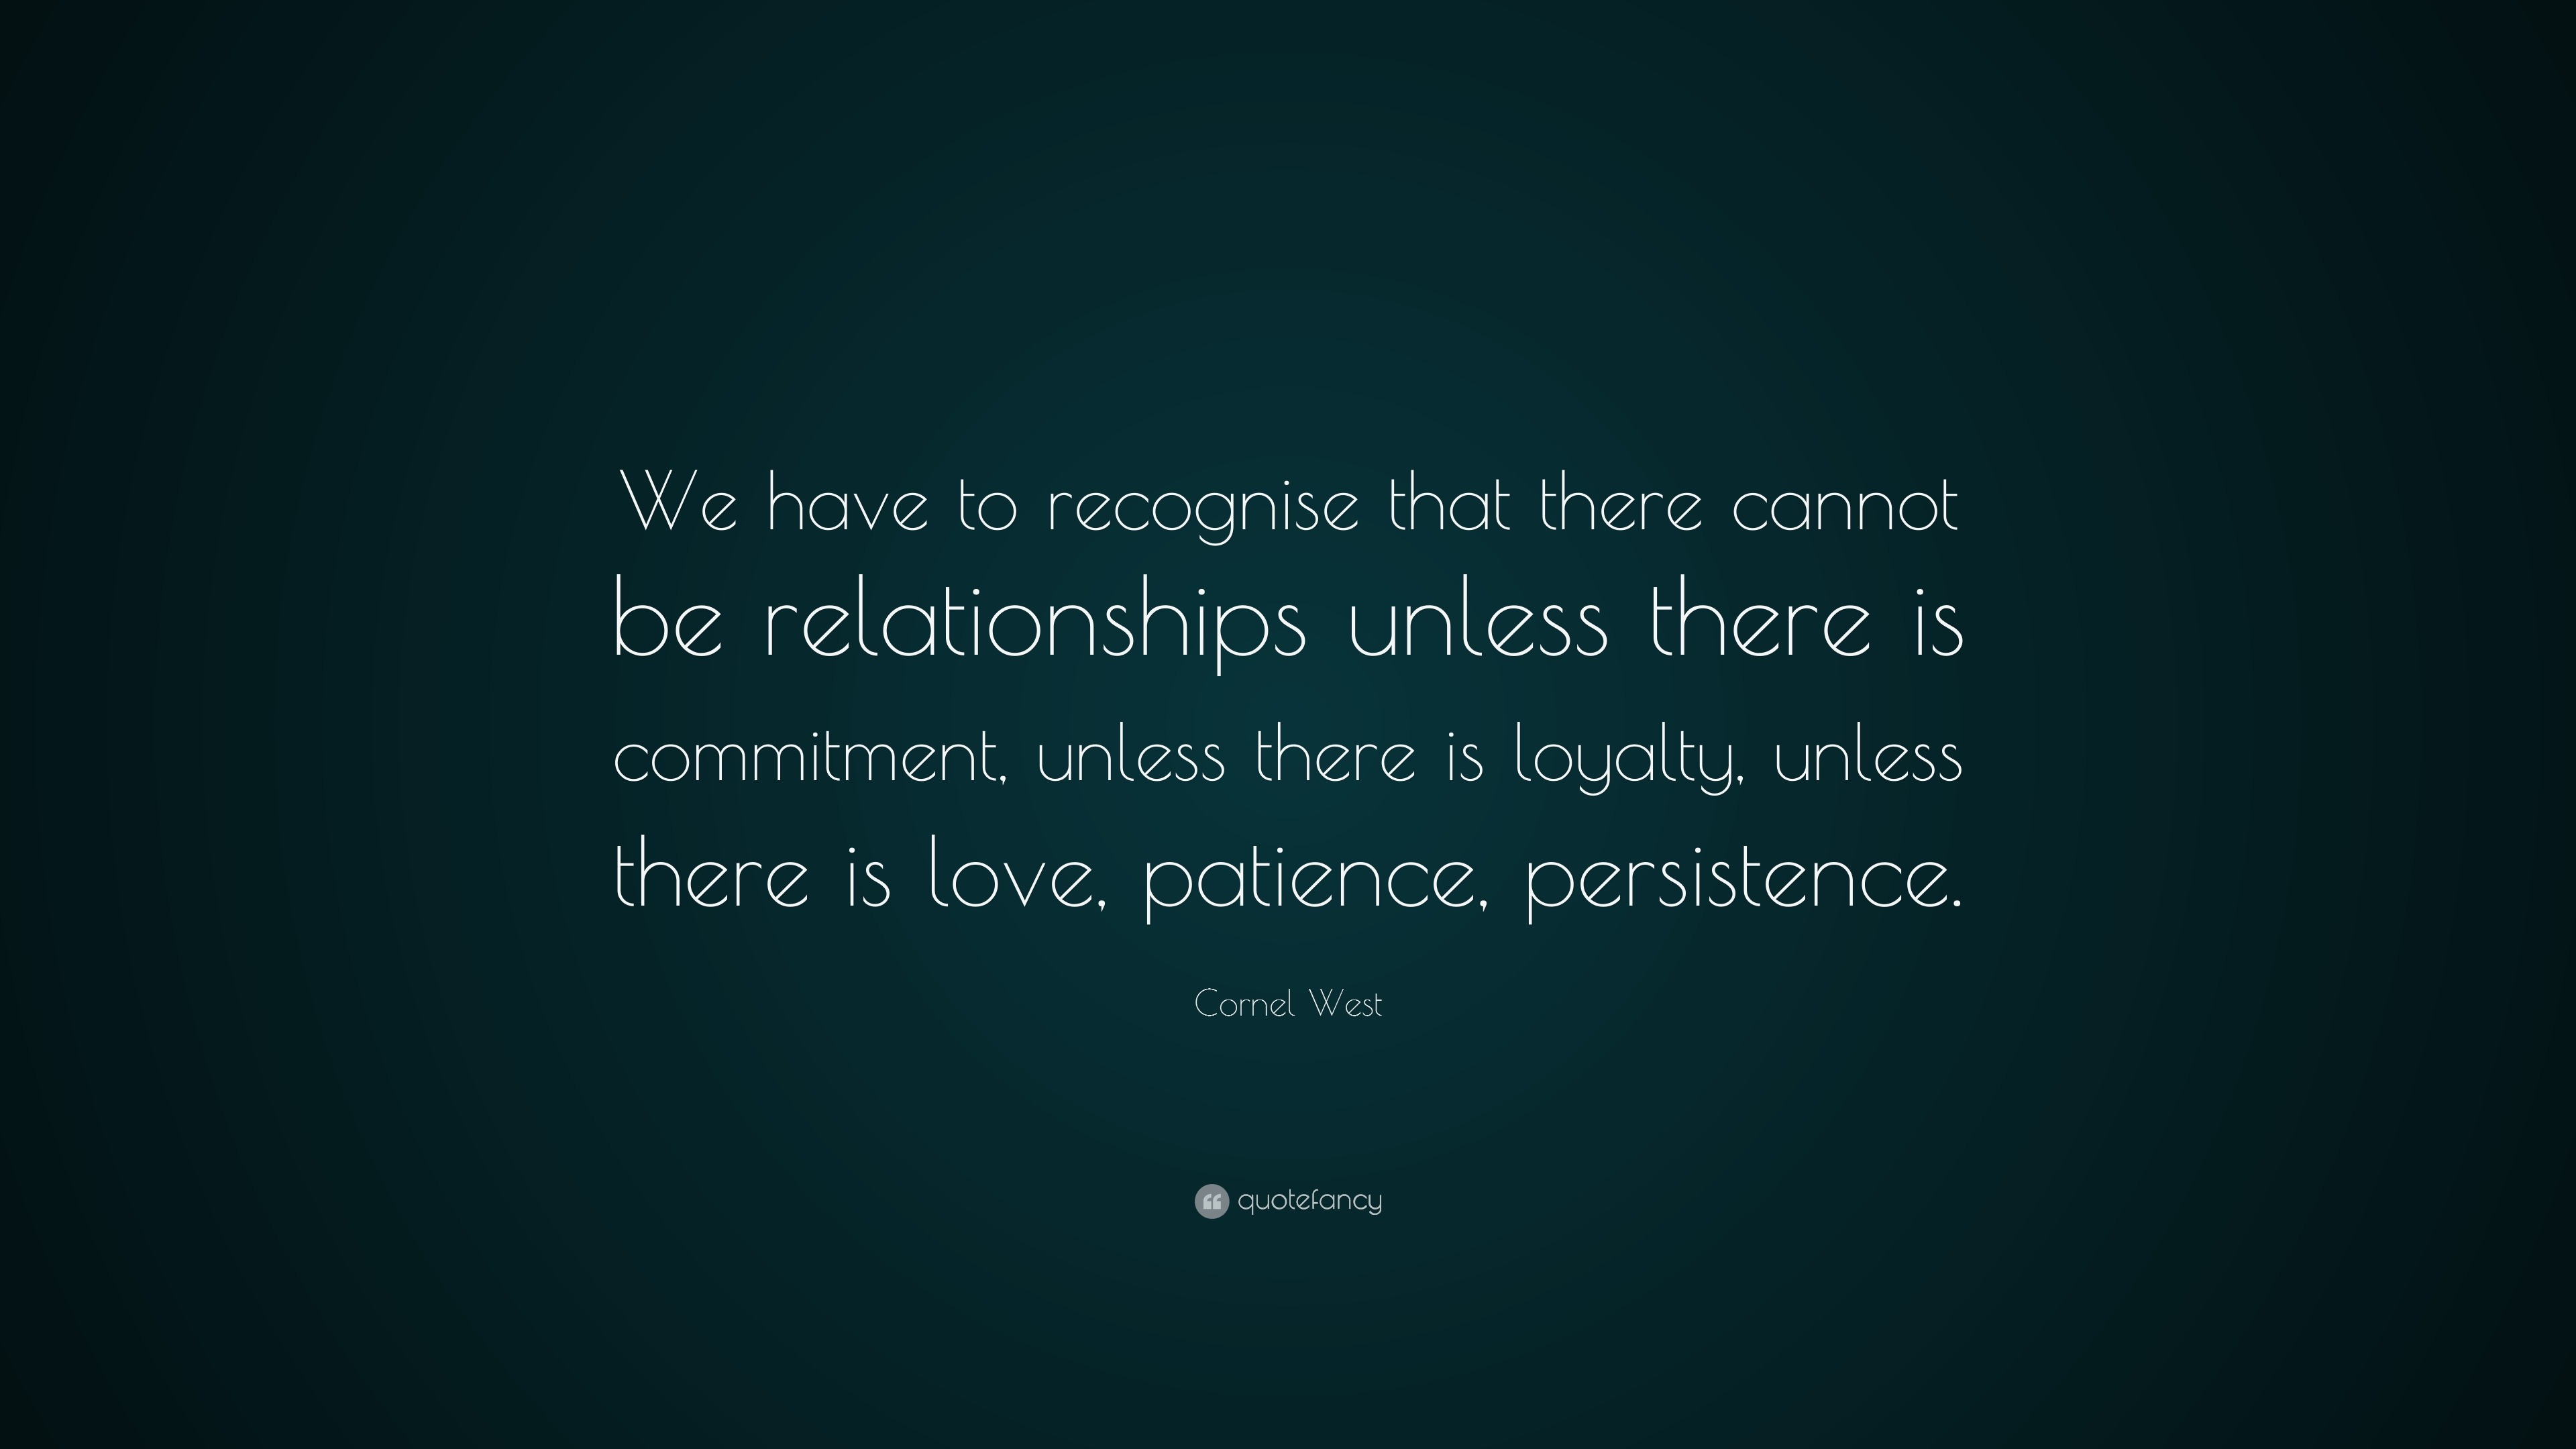 Cornel West Quote “We have to recognise that there cannot be relationships unless there